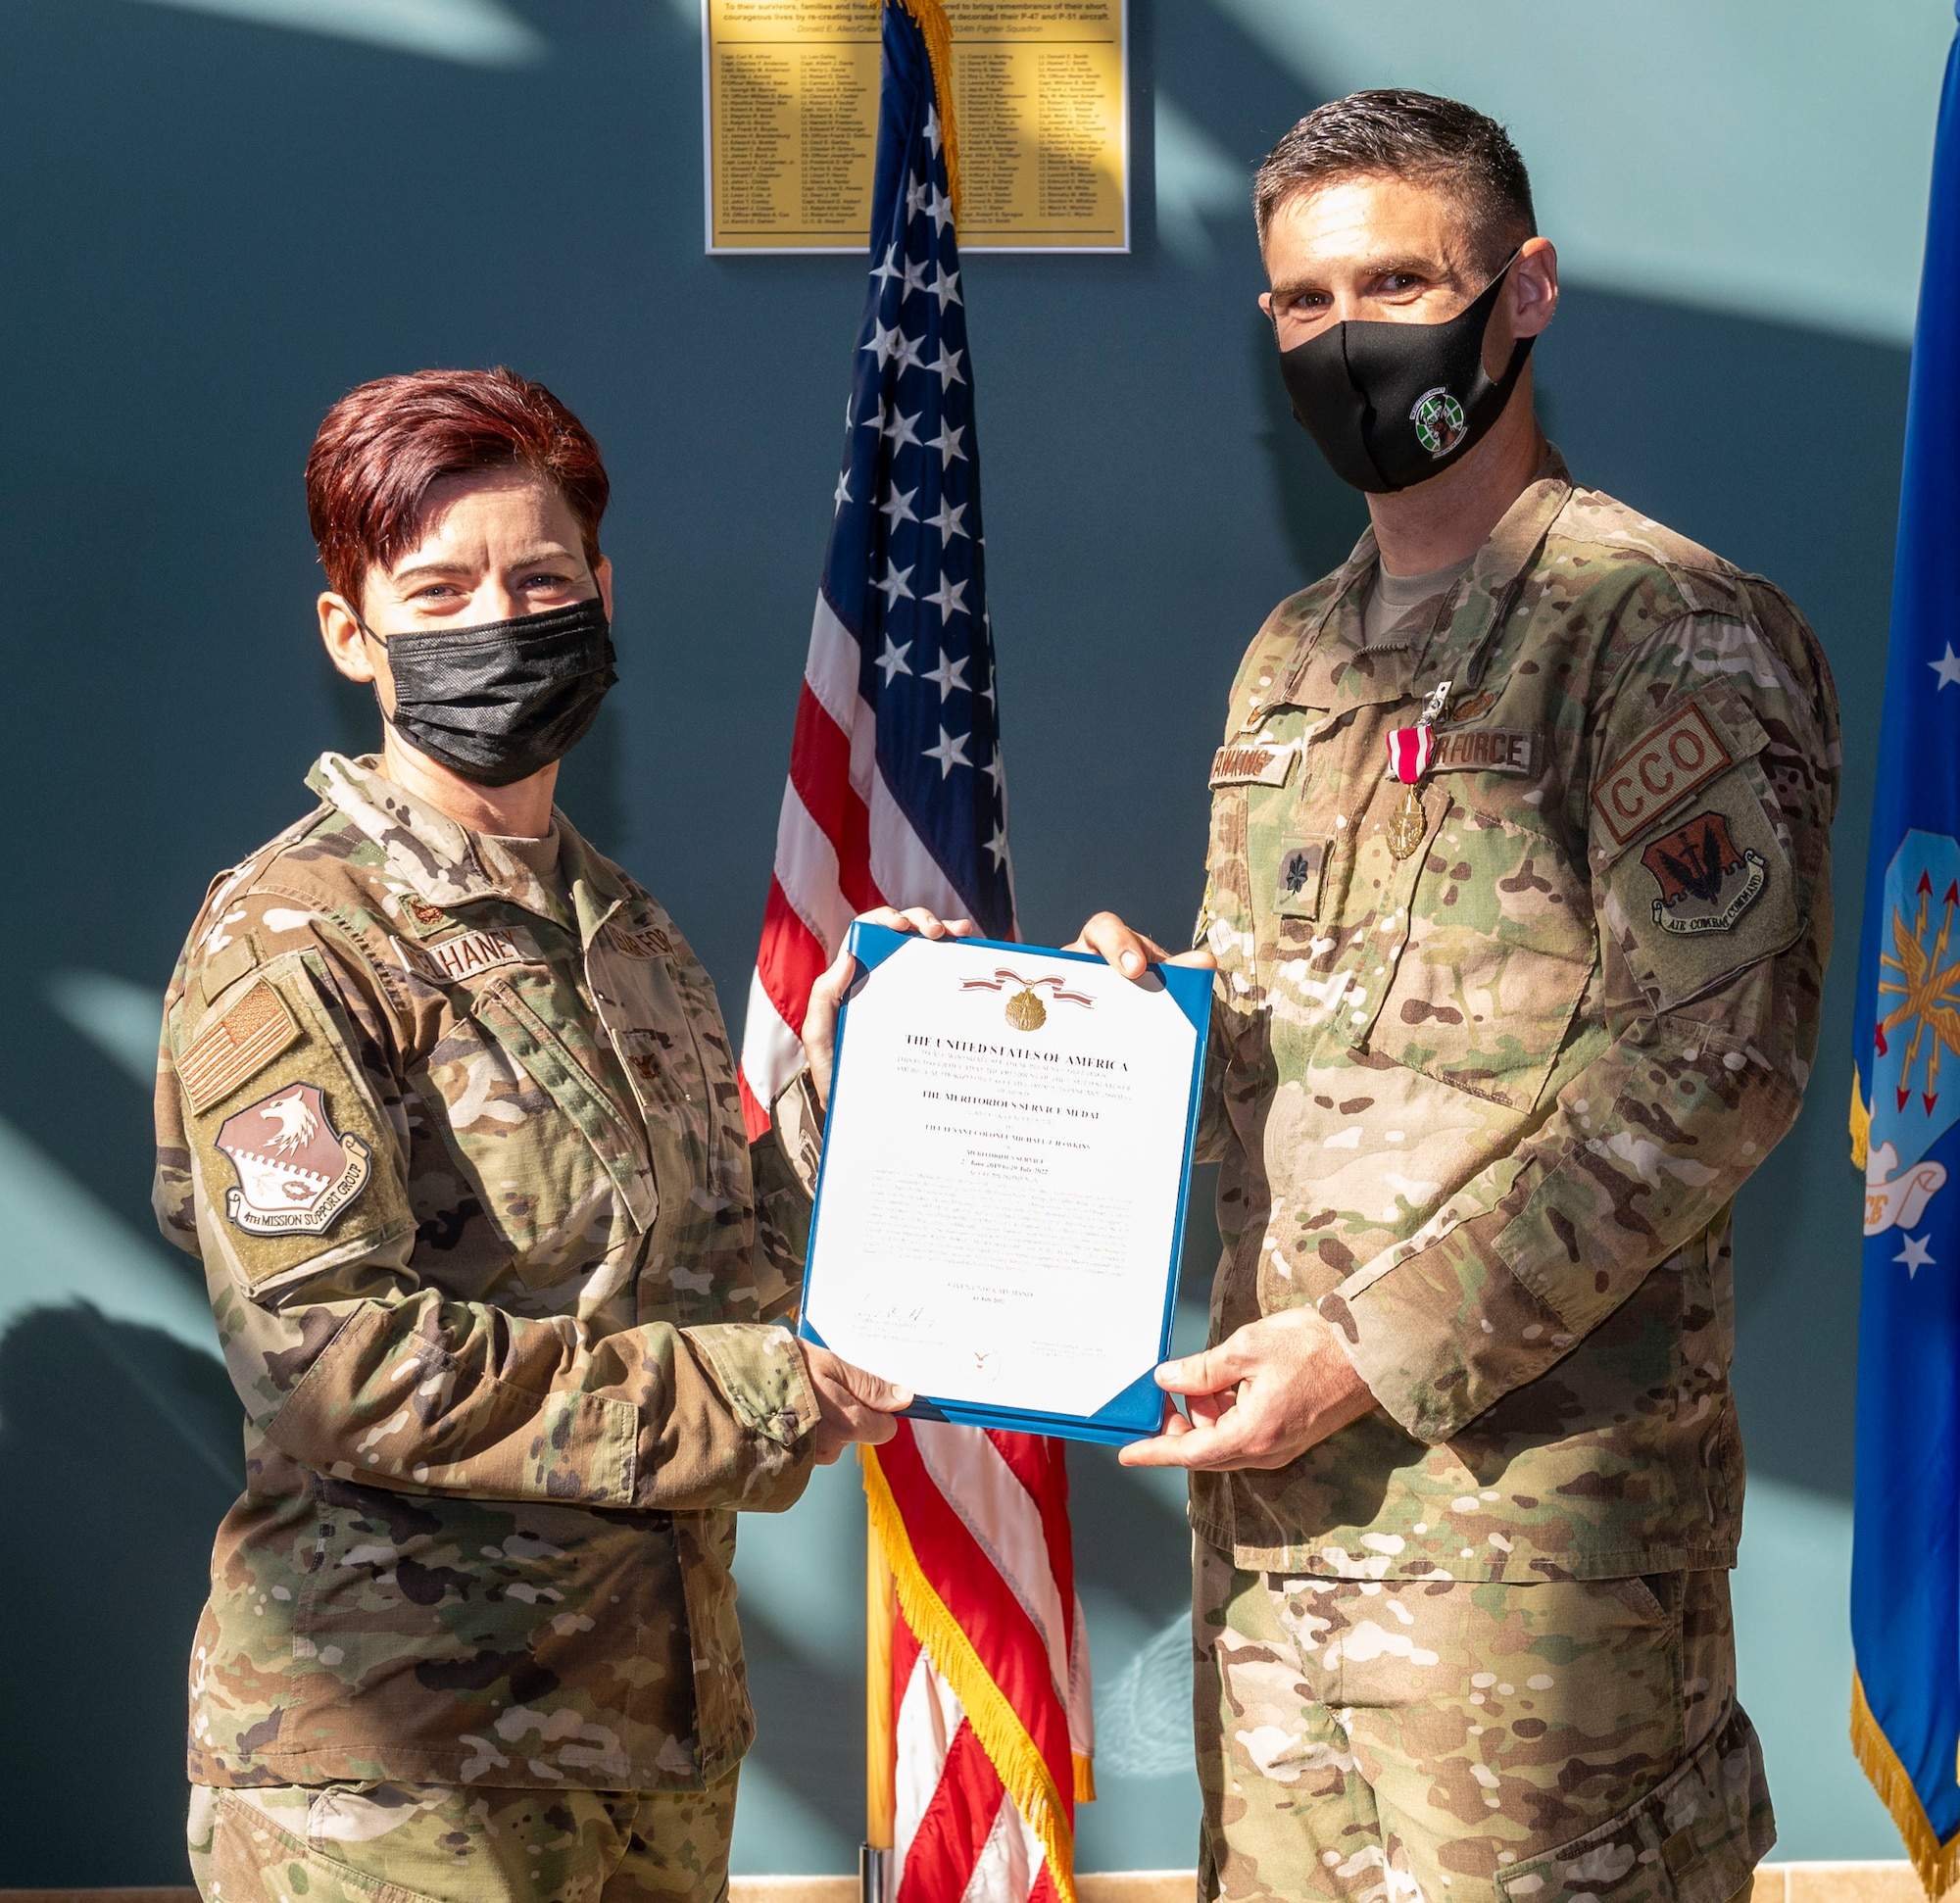 Col. Tammy McElhaney, left, 4th Mission Support Group commander, presents a Legion of Merit citation to Lt. Col. Michael Hawkins, outgoing 4th Contracting Squadron commander, during a change of command at Seymour Johnson Air Force Base, North Carolina, July 29, 2022. During his command, Hawkins provided contract support for over $3 billion in assets and ensured execution of an annual operations and maintenance budget of $90 million. (U.S. Air Force photo by Airman 1st Class Sabrina Fuller)